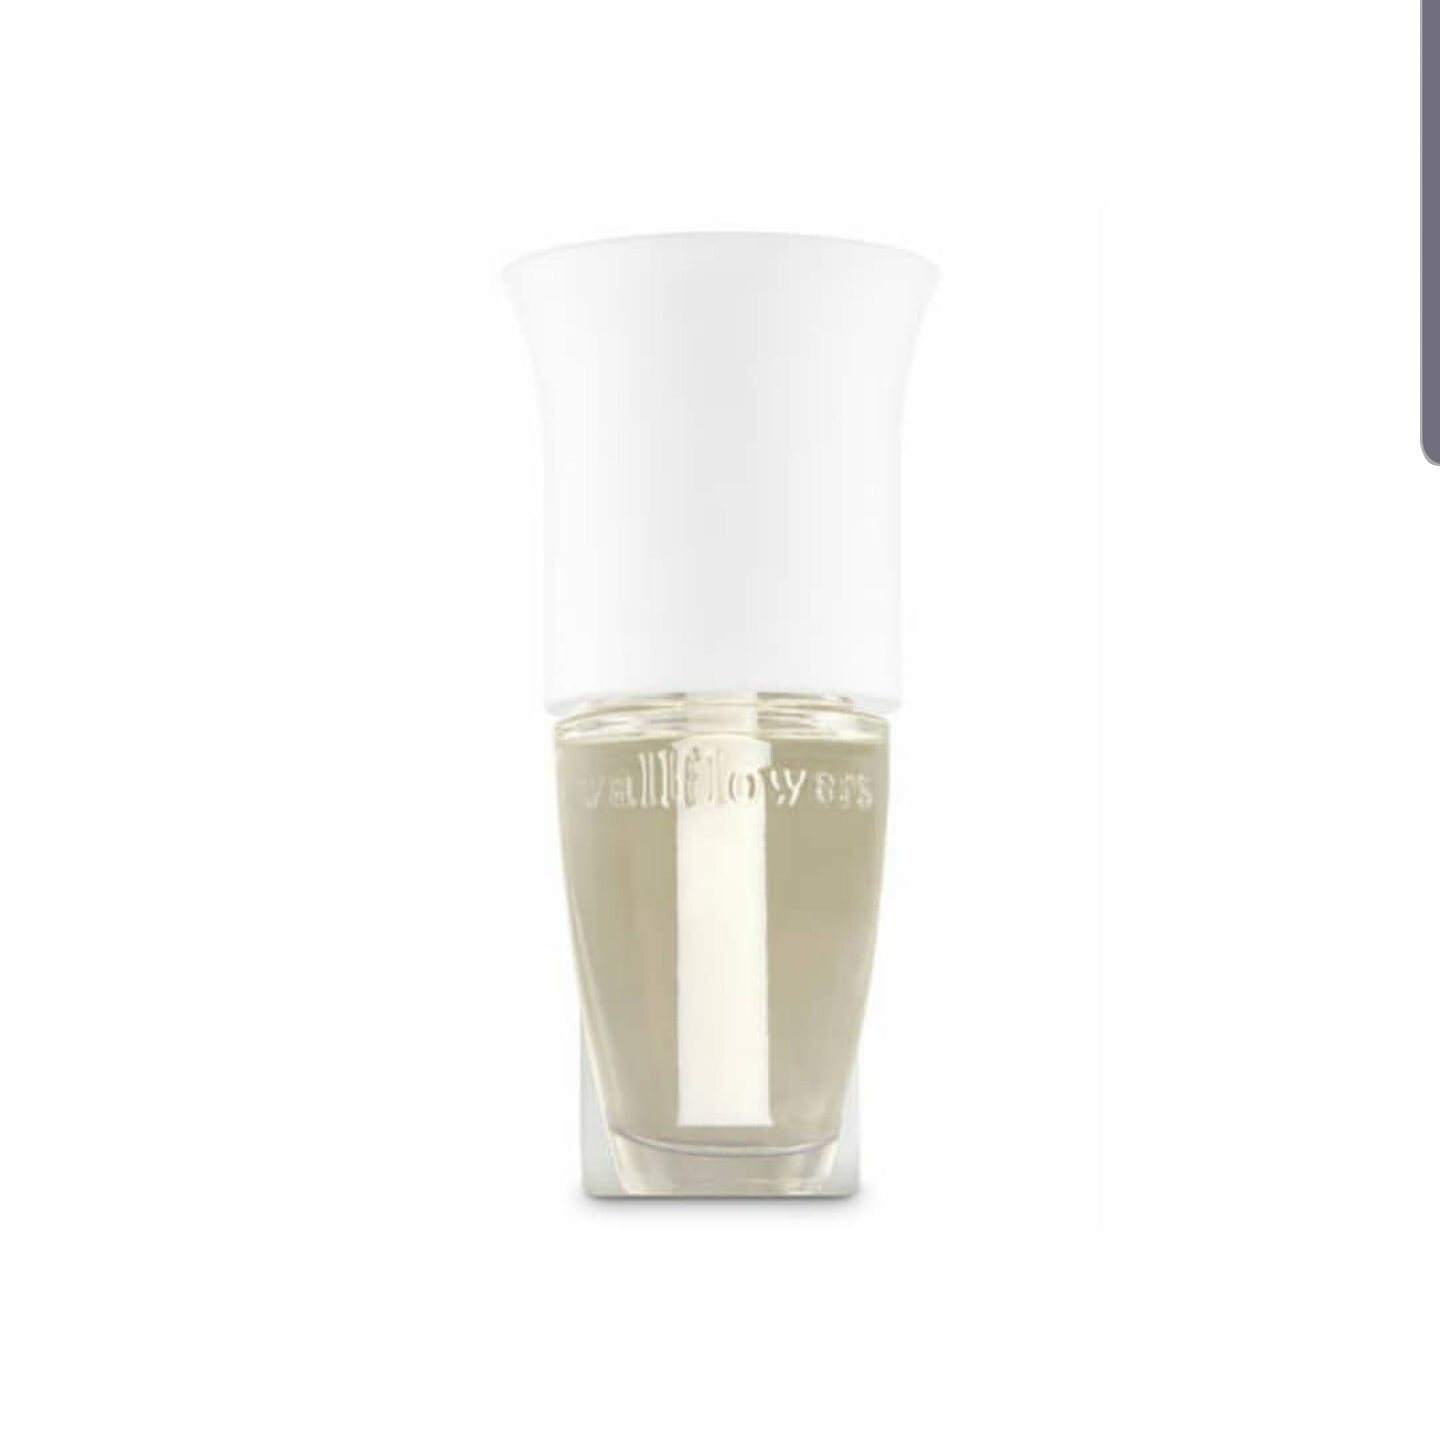 Bath and body works White Flare with nightlight